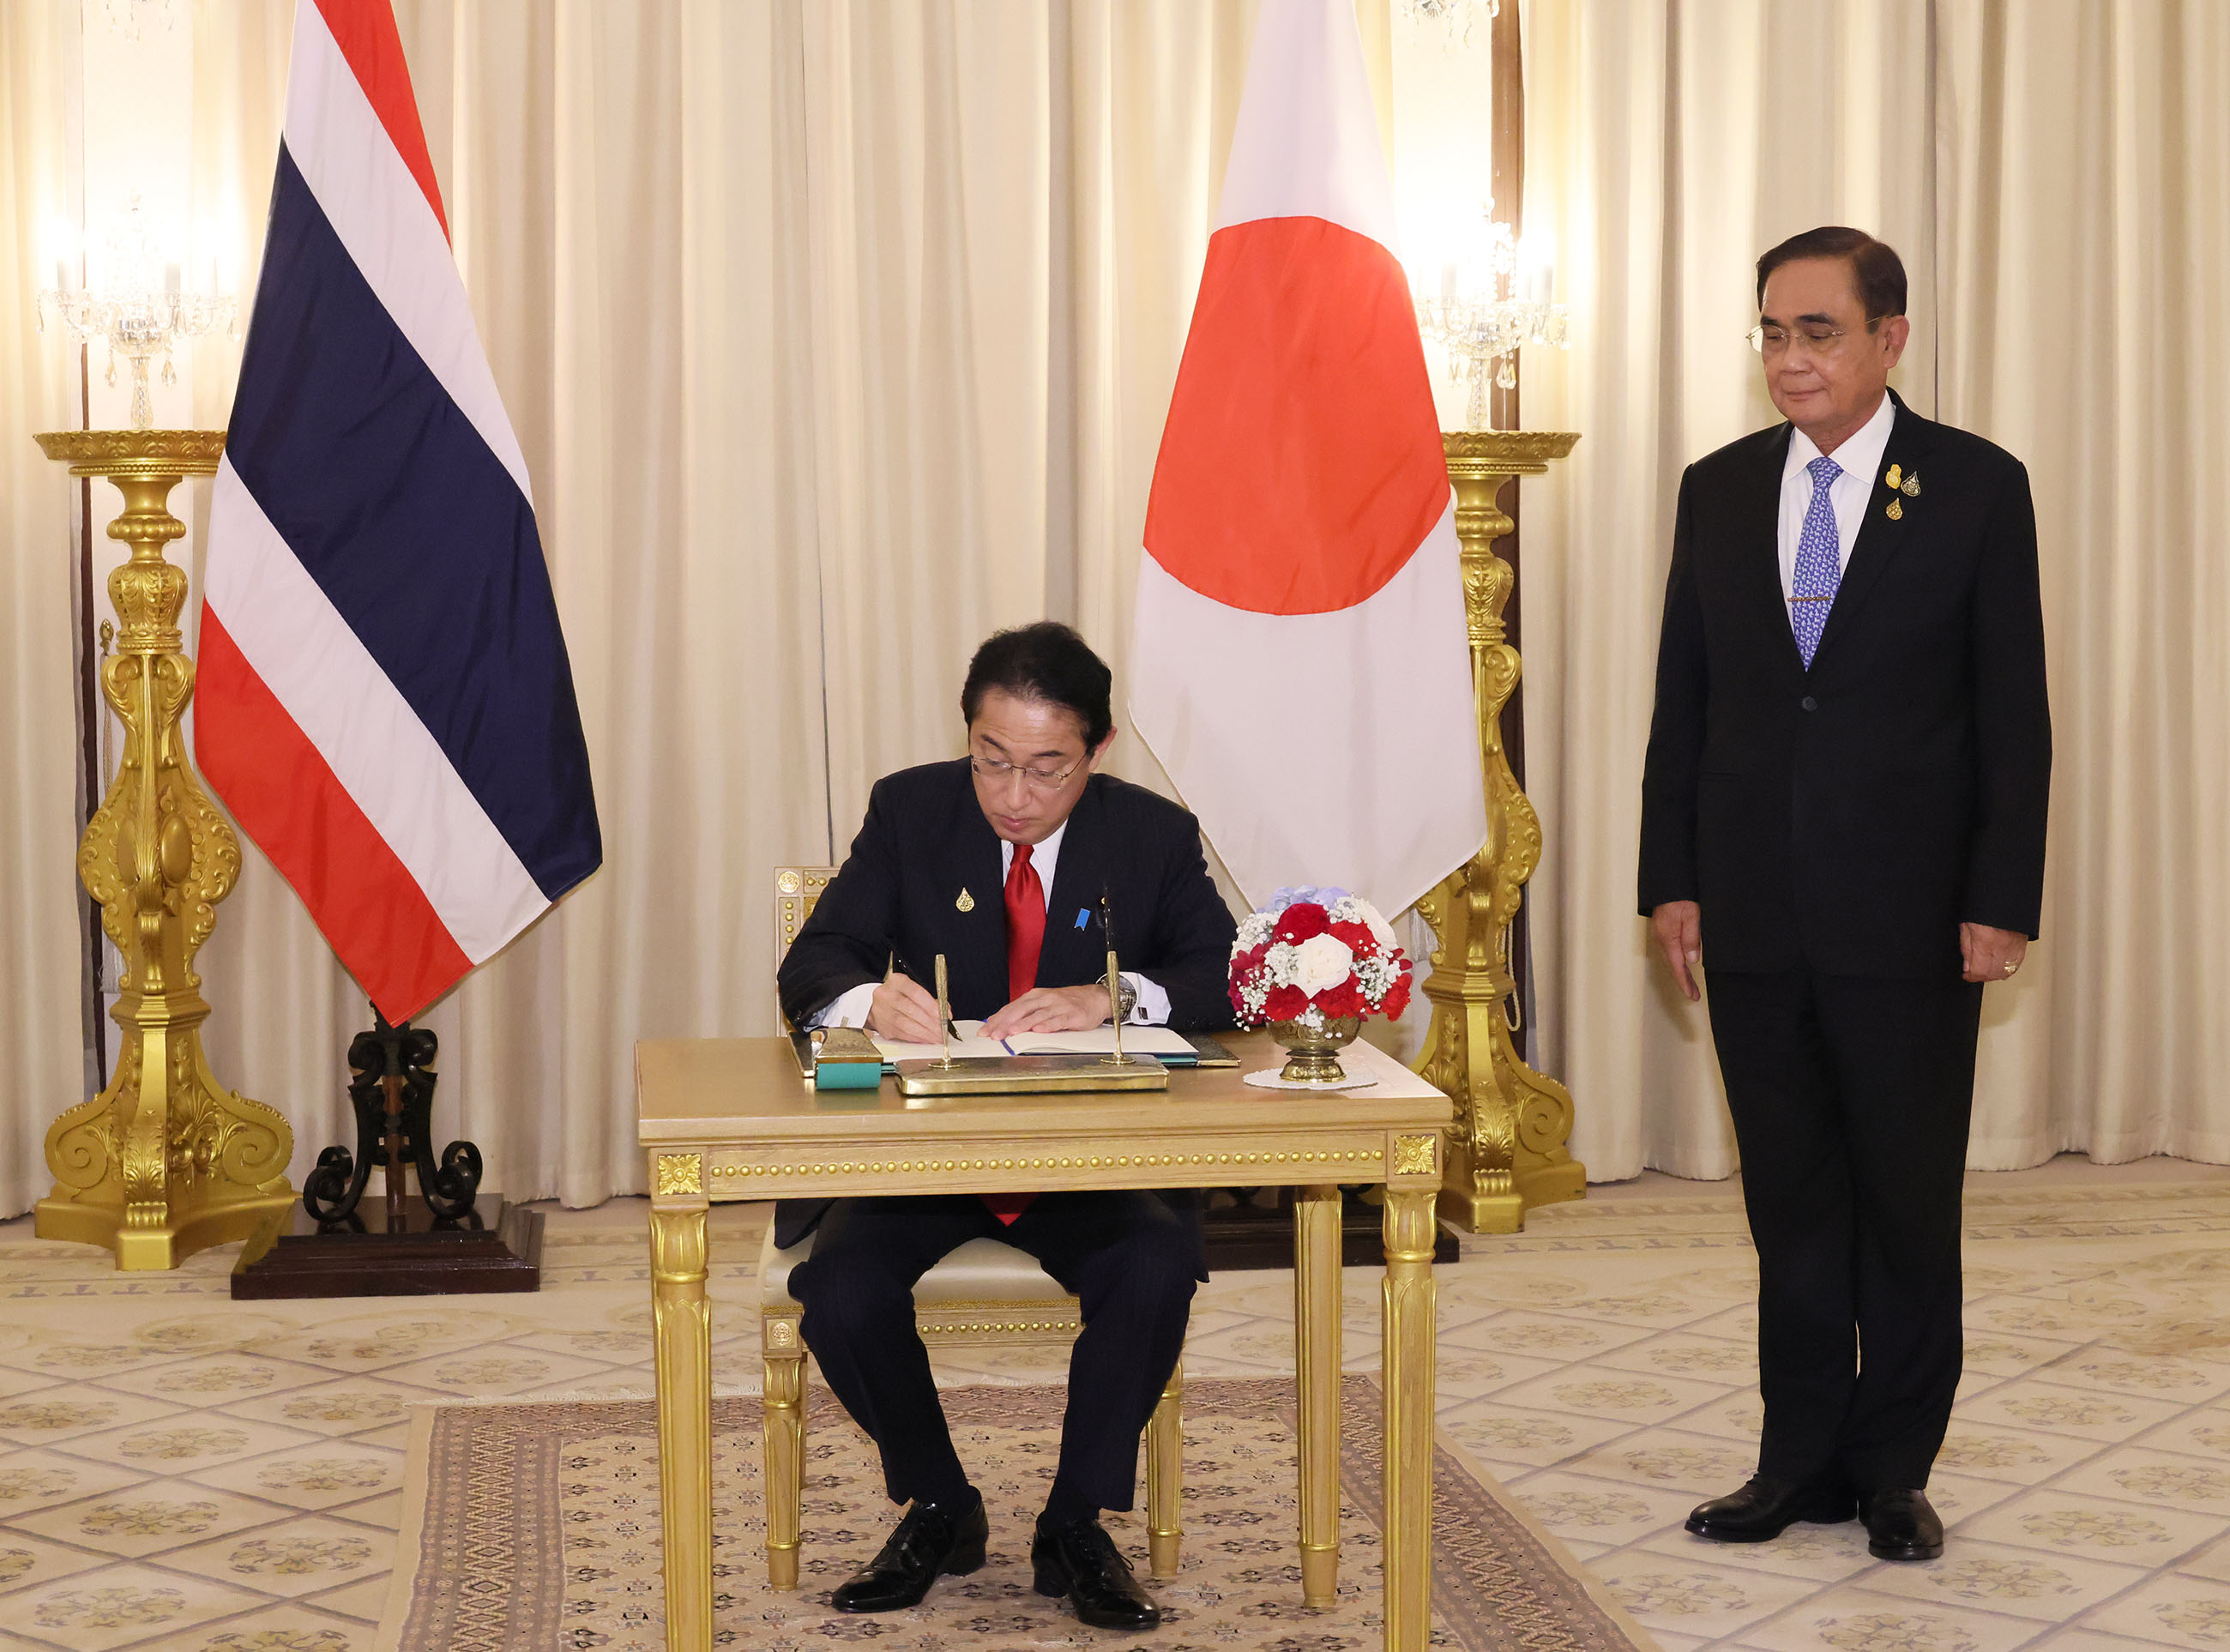 Prime Minister Kishida signing the guest book